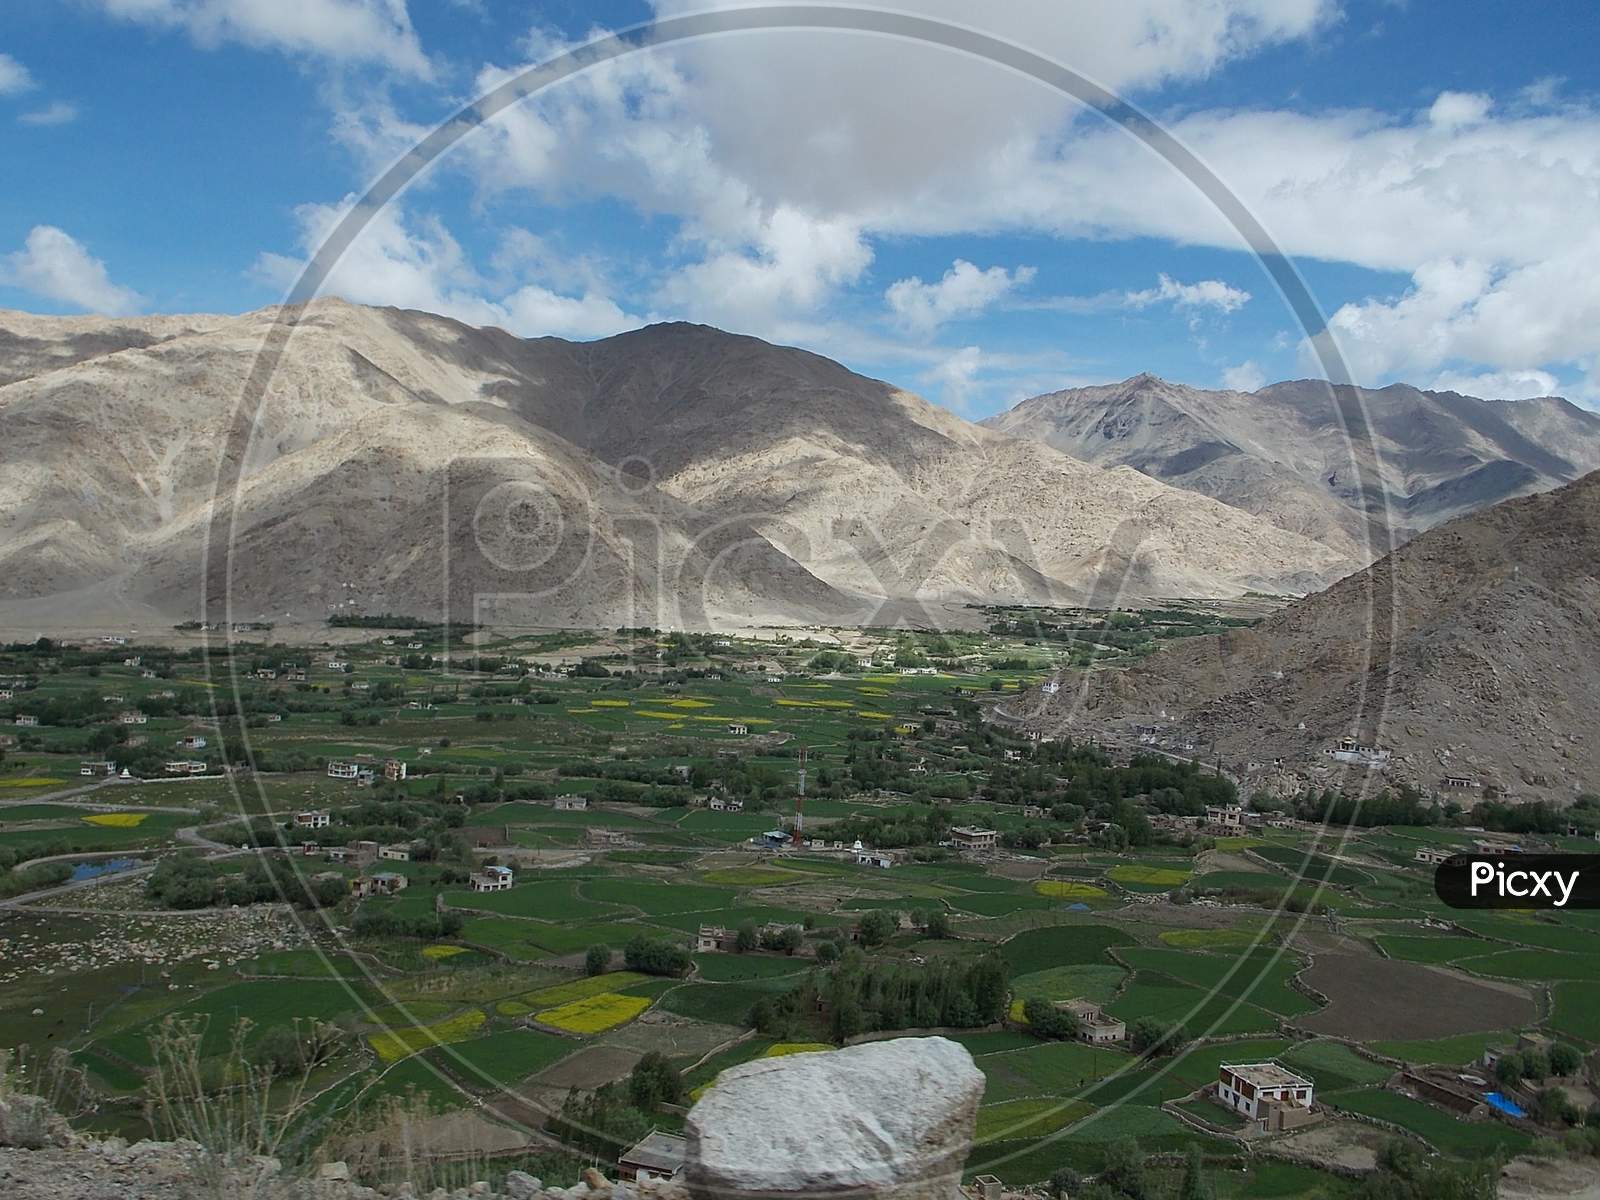 A Beautiful Valley Between the Mountains in Leh